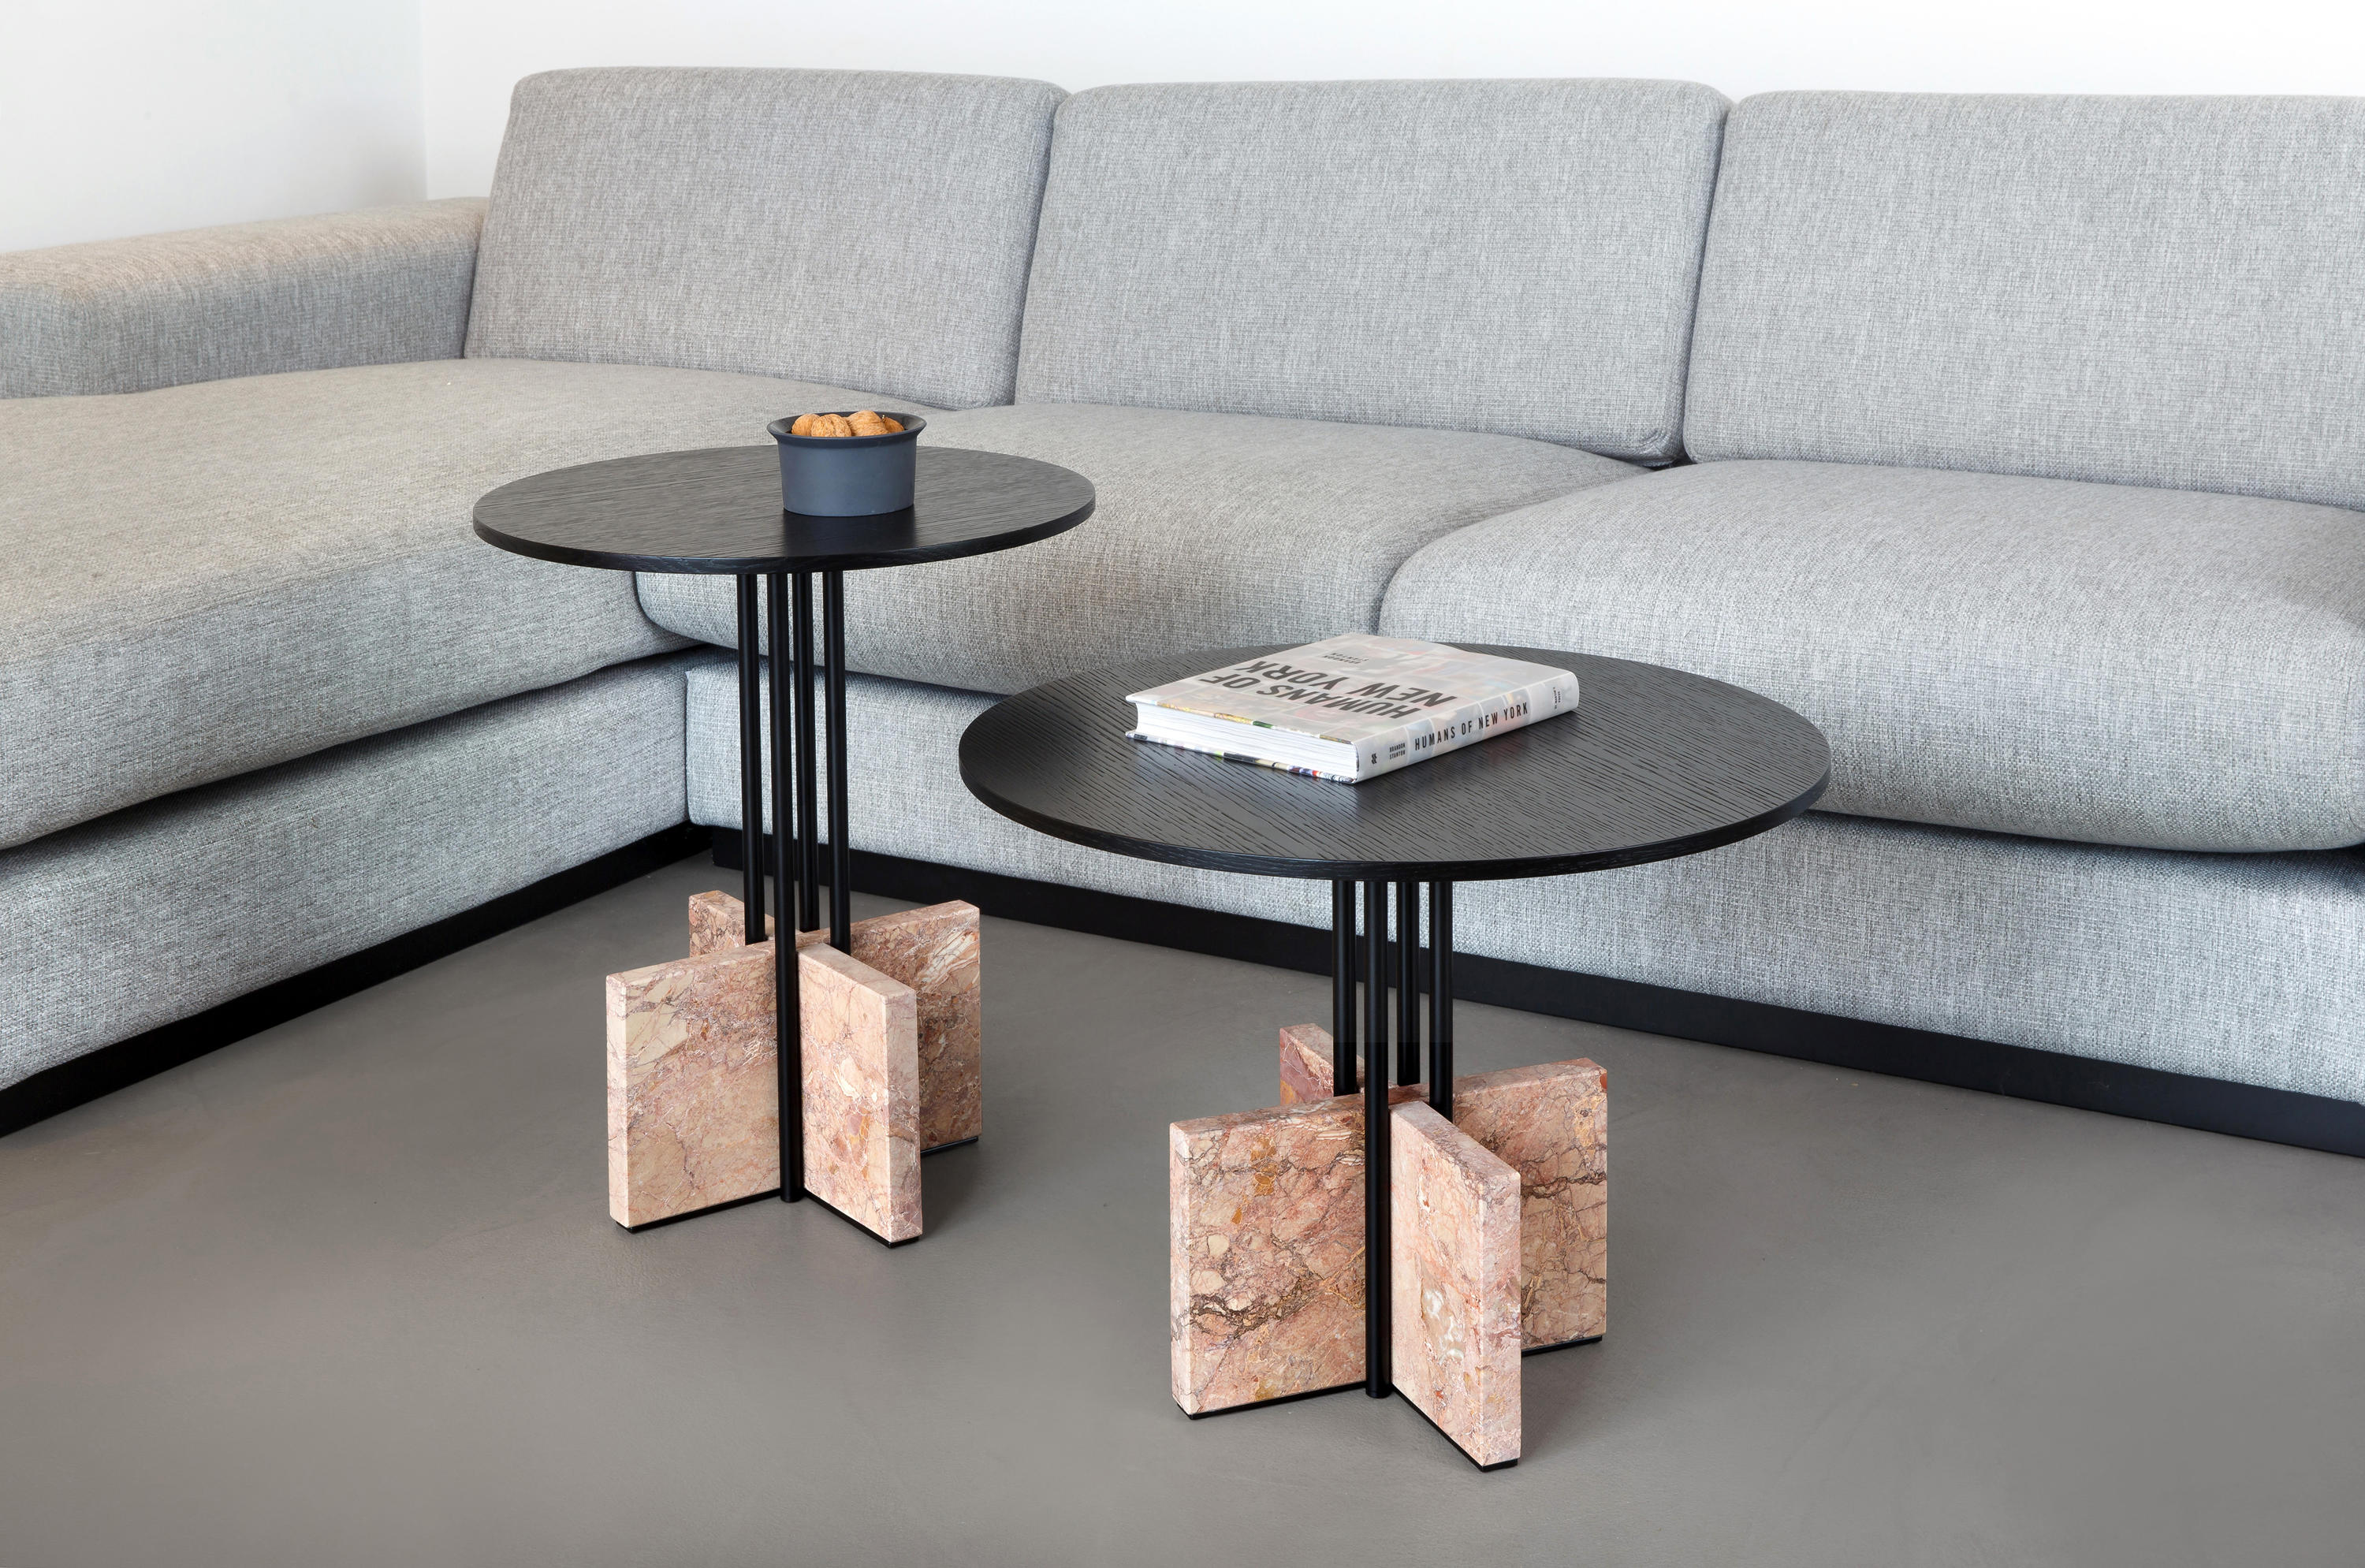 GRAVITY Table by Hanne Willmann for Favius